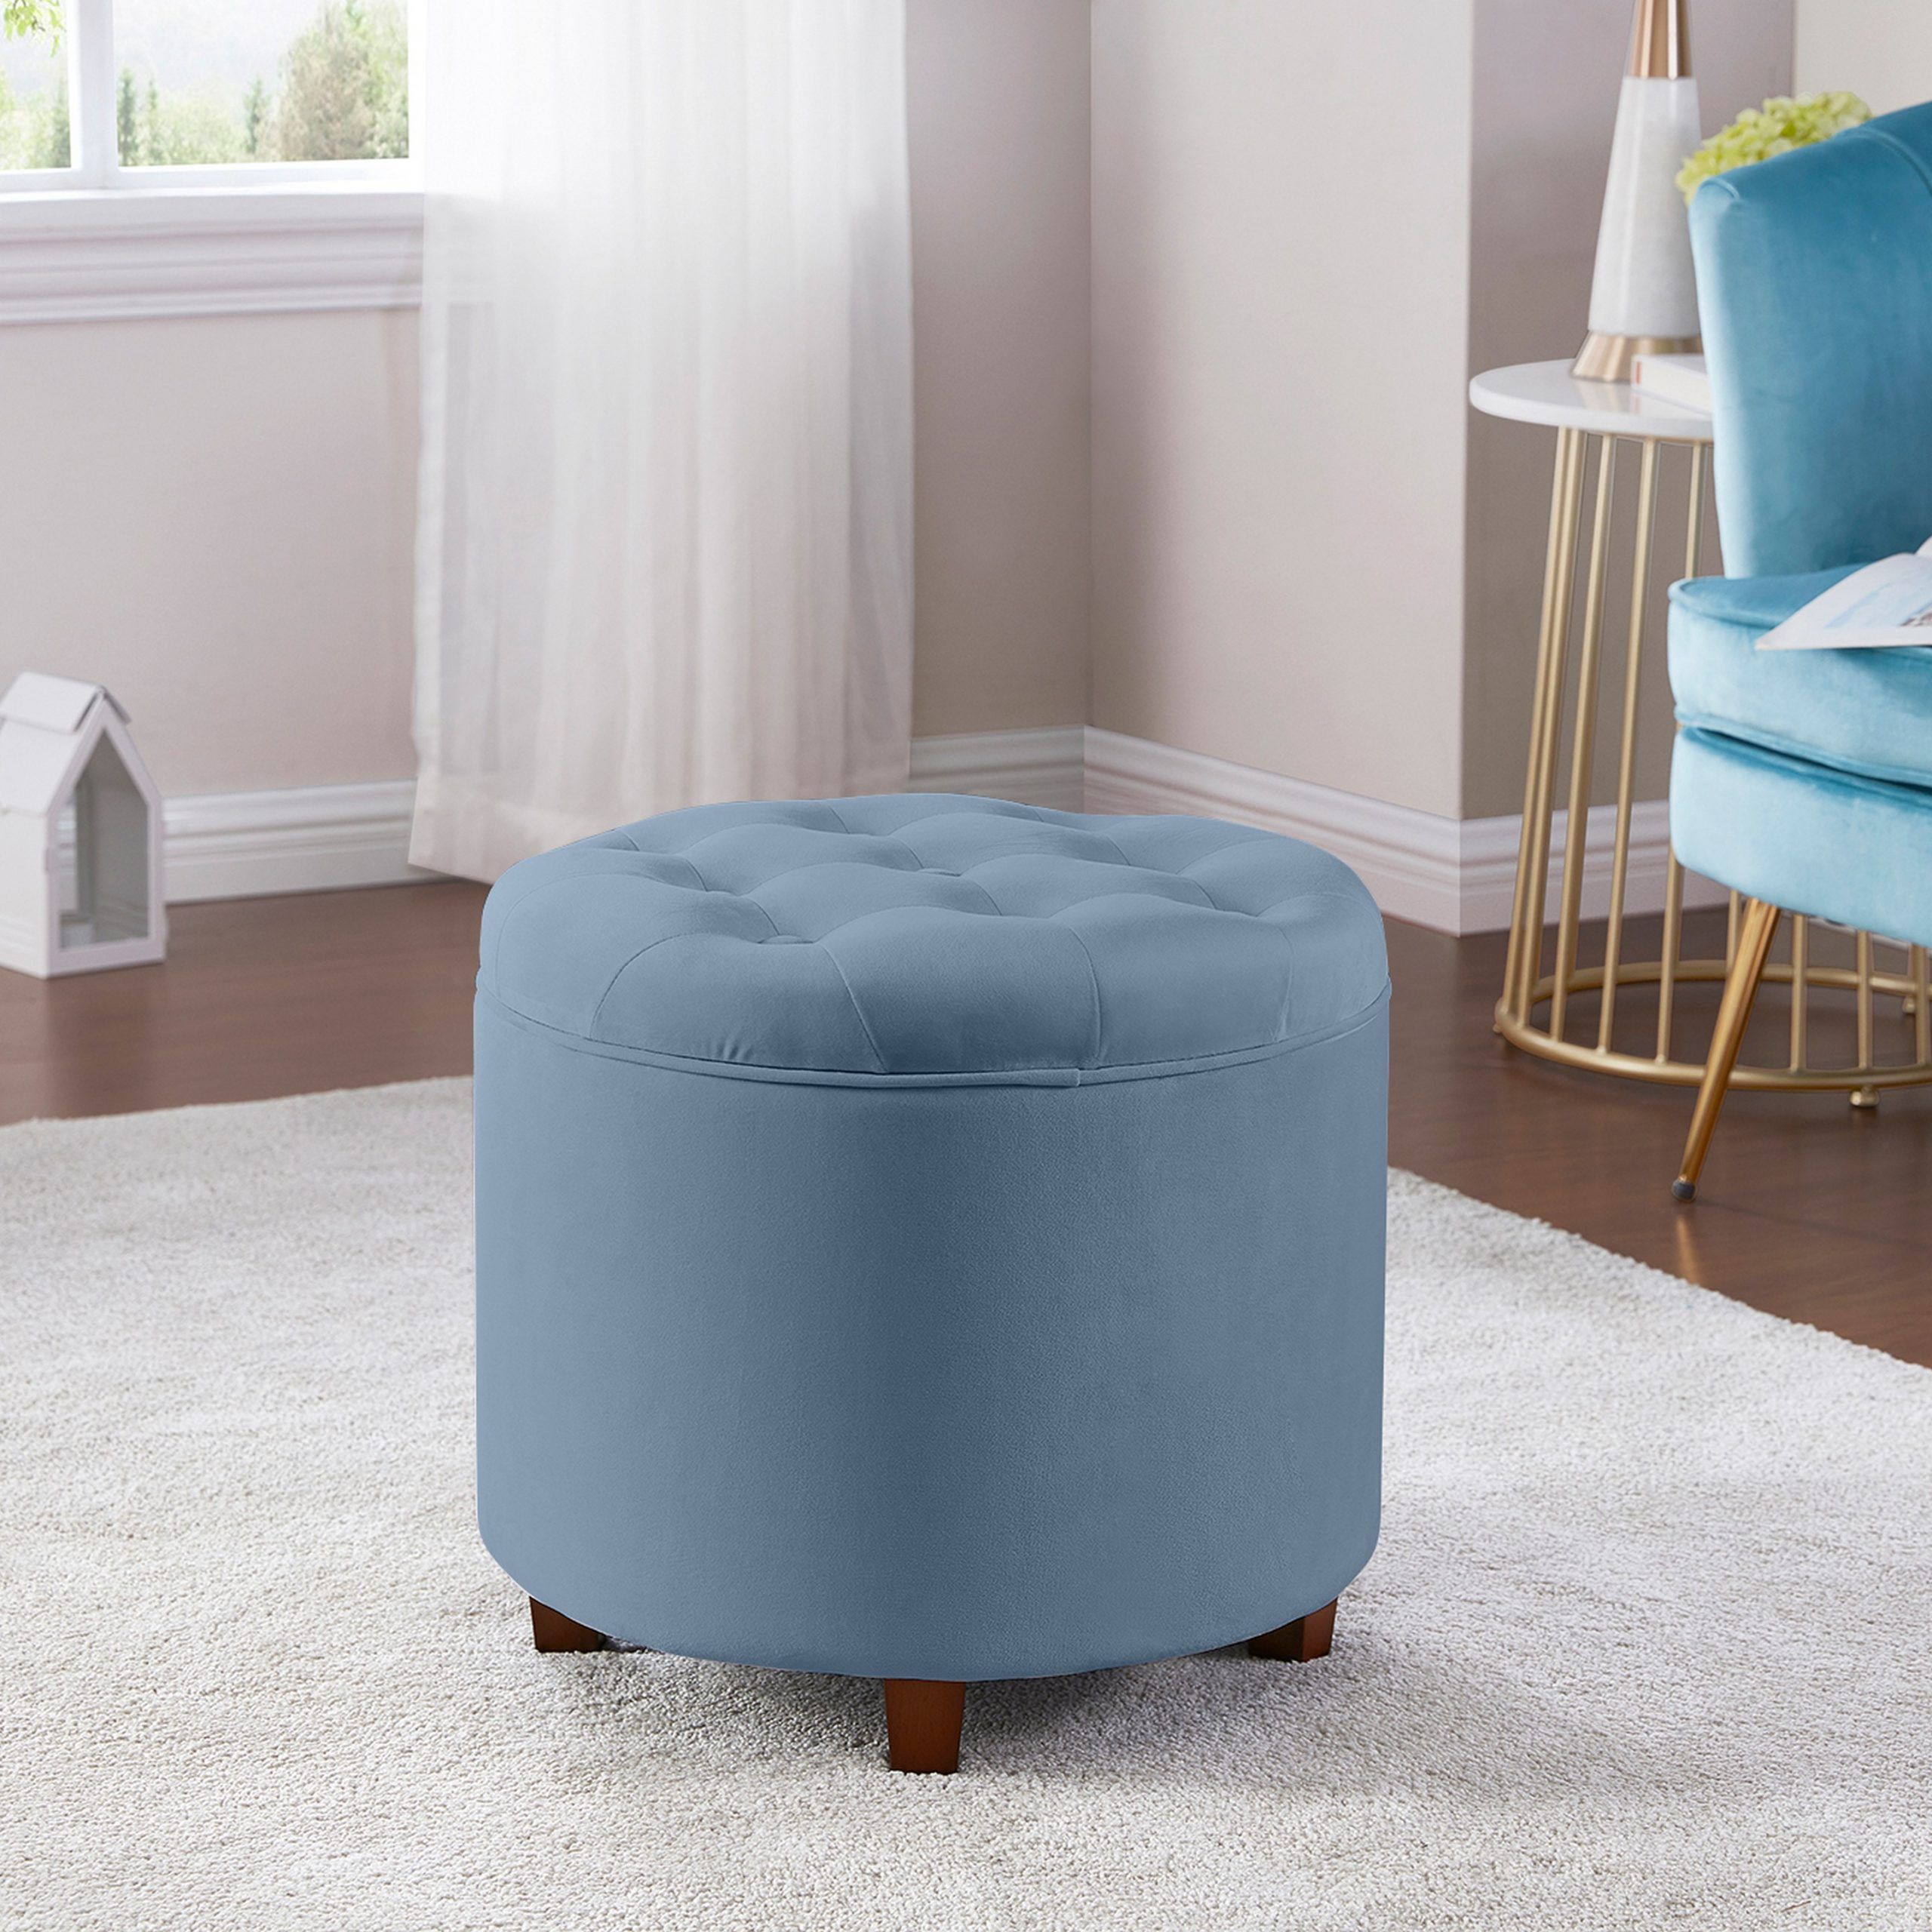 Most Current Velvet Ribbed Fabric Round Storage Ottomans Regarding Donovan Round Tufted Velvet Storage Ottoman Foot Rest Stool/seat With (View 1 of 10)